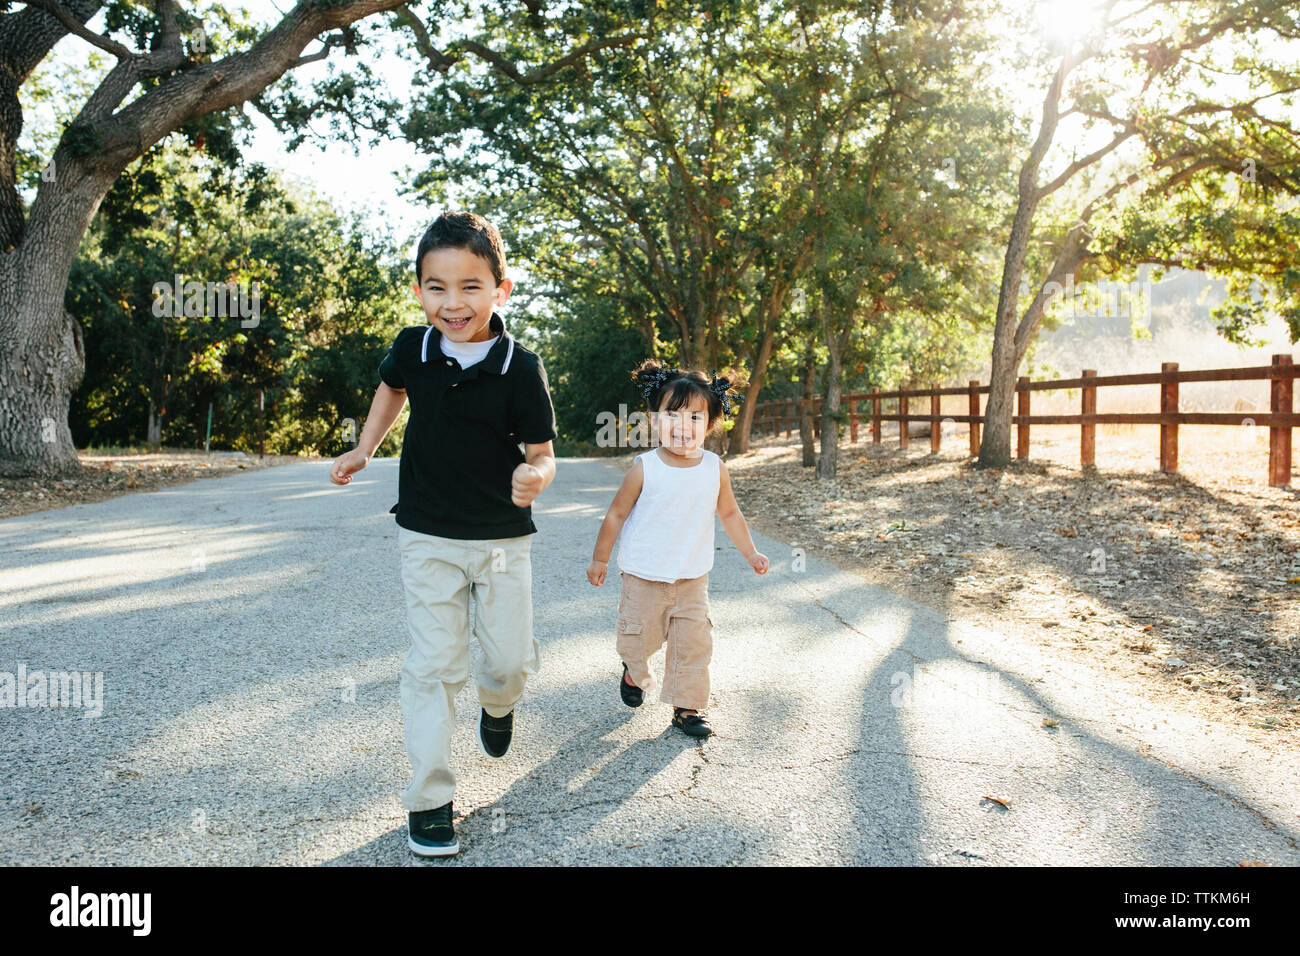 Portrait of happy cute siblings running on road against trees in park Stock Photo